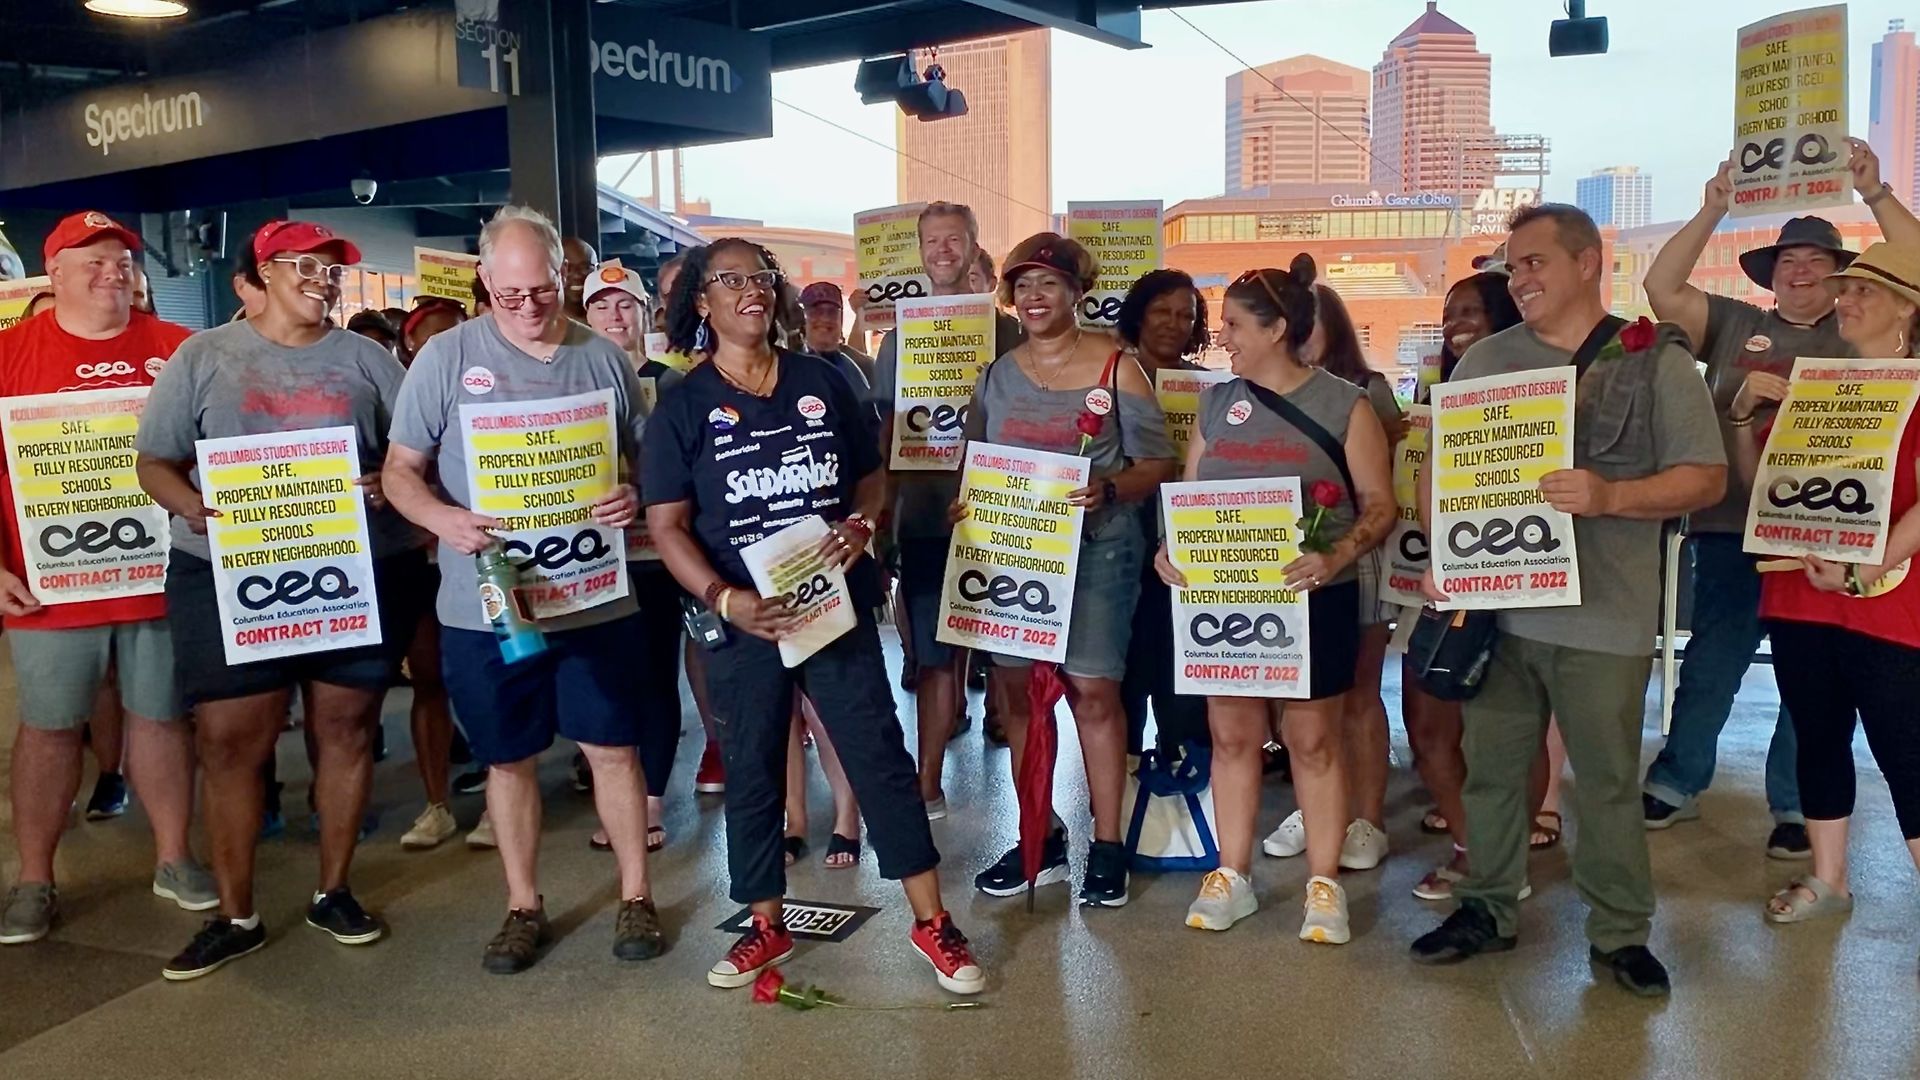 Columbus Education Association leadership holds signs reading "#ColumbusStudentsDeserve safe, properly maintained, fully resourced schools in every neighborhood, CEA contract 2022"